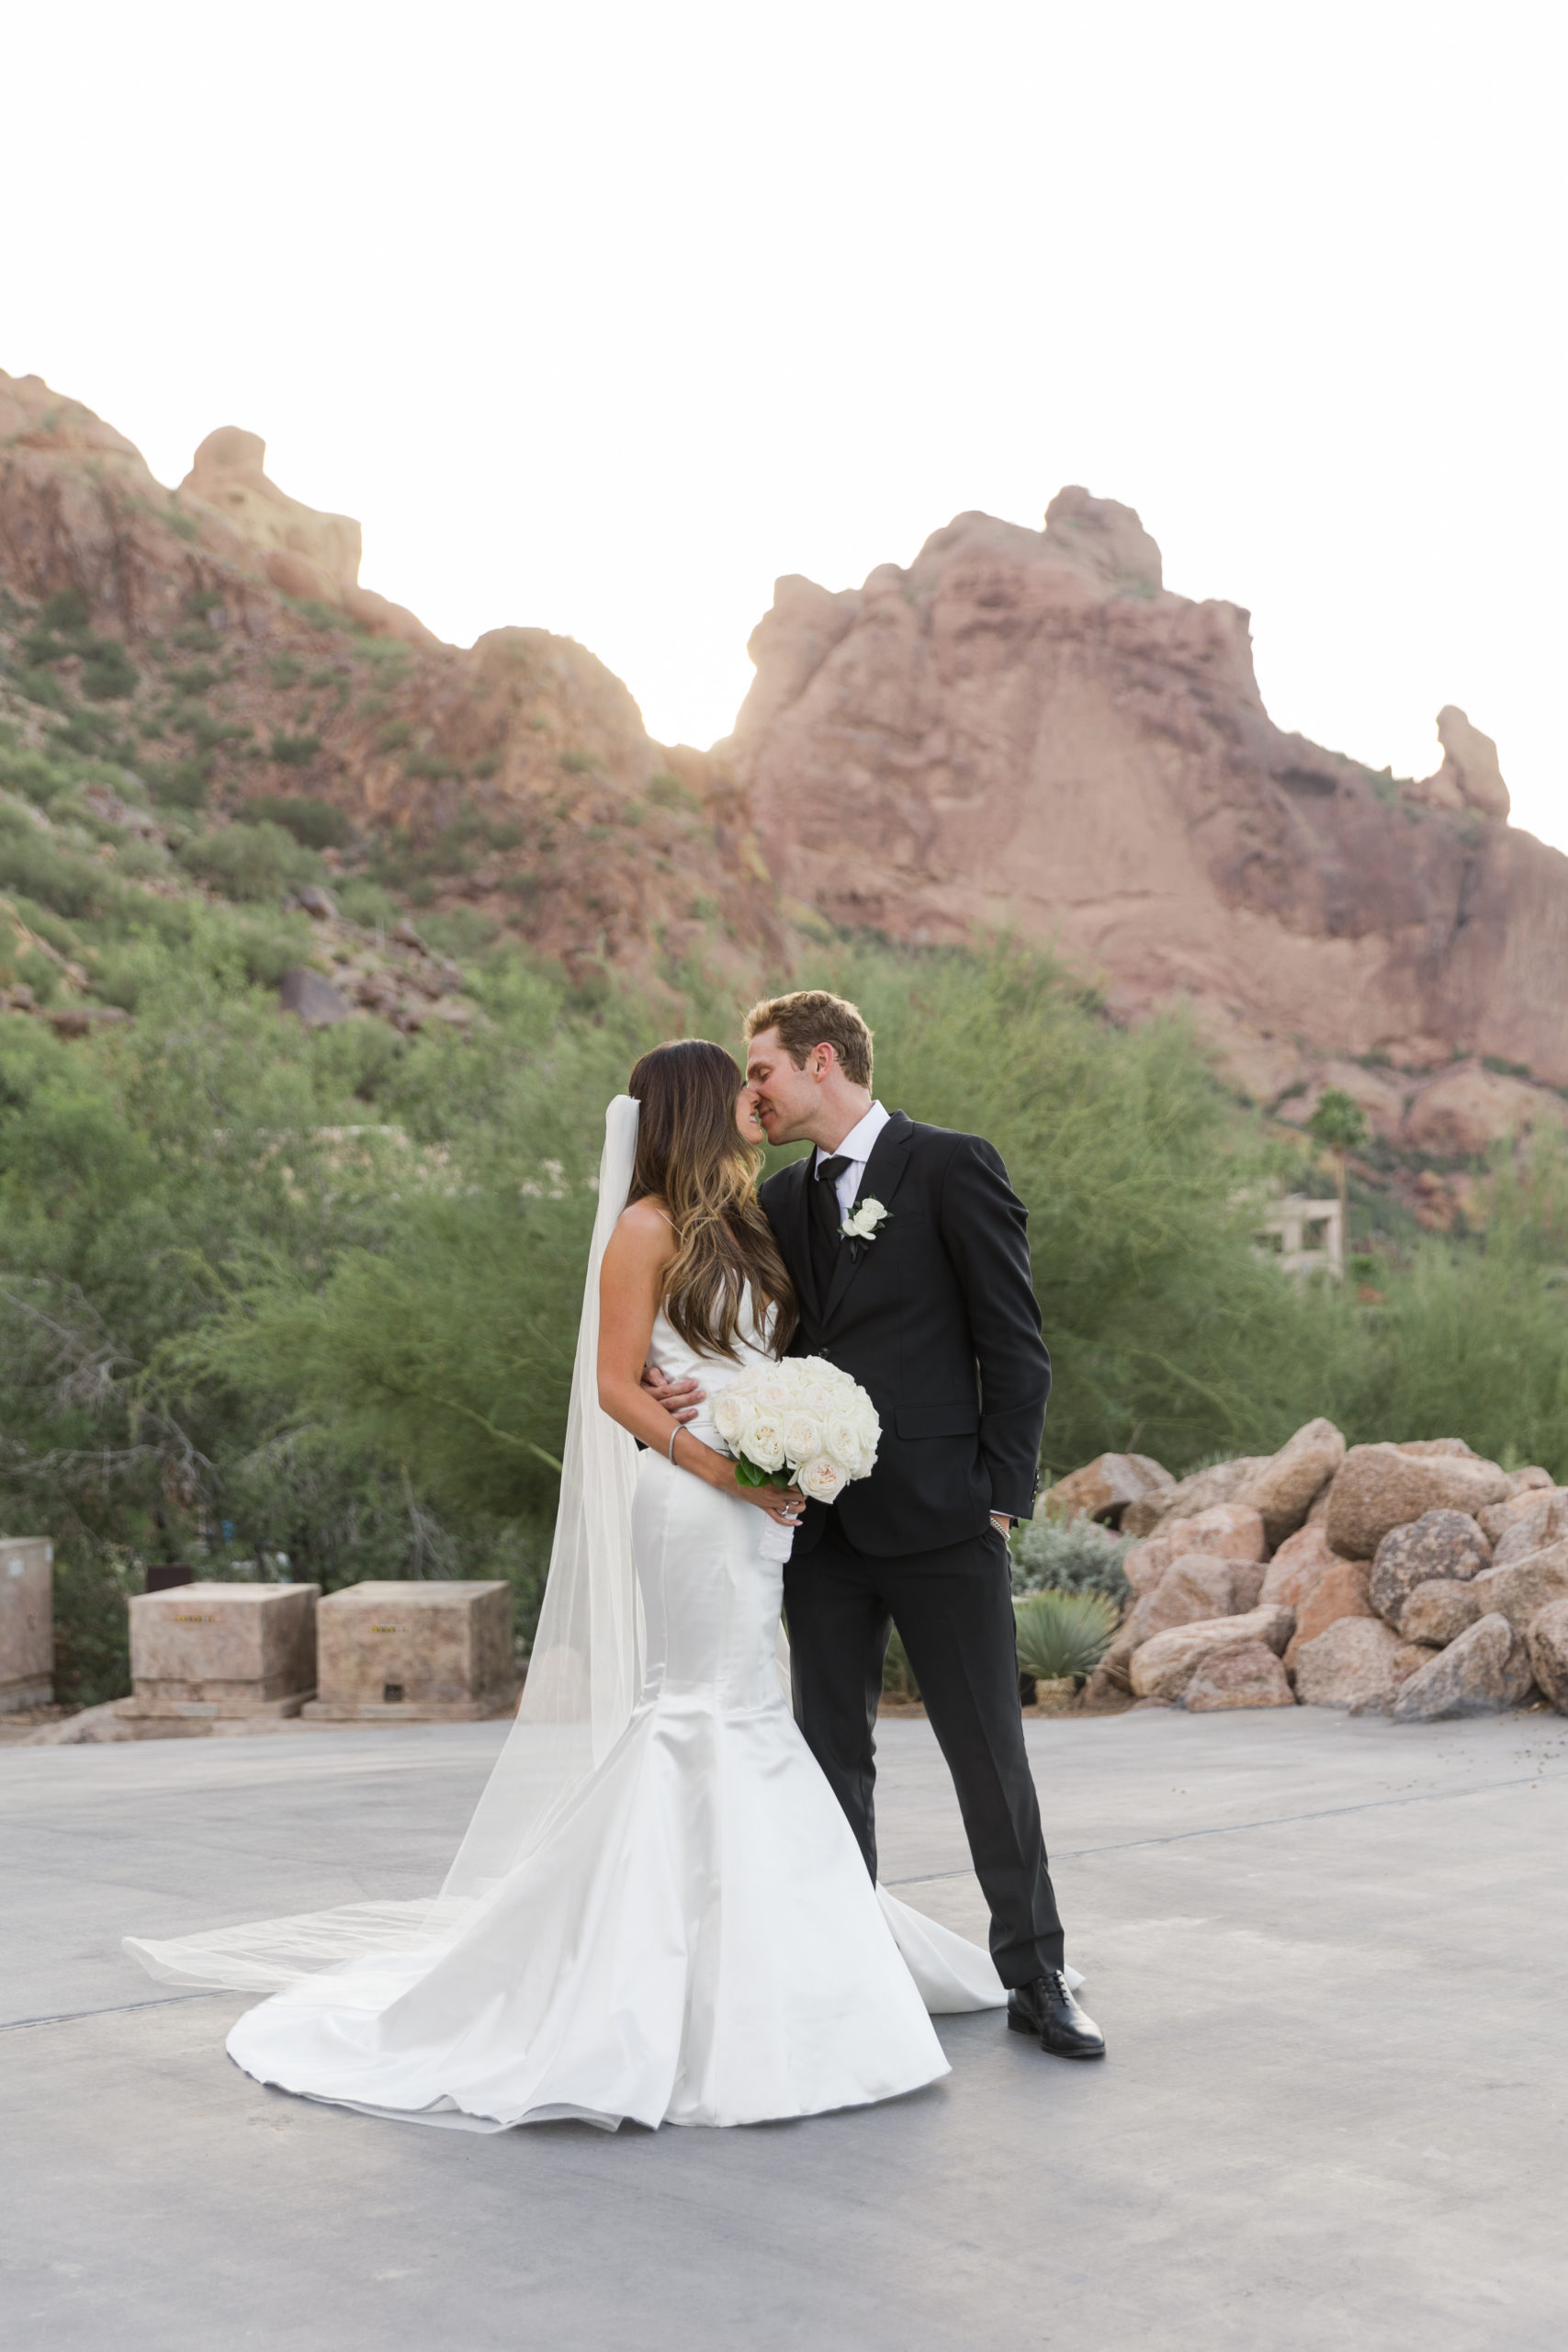 Groom leans in to kiss the bride as she smiles and holds on to her bridal bouquet during their elegant Camelback Mountain Wedding, captured by Kyla Jeanette